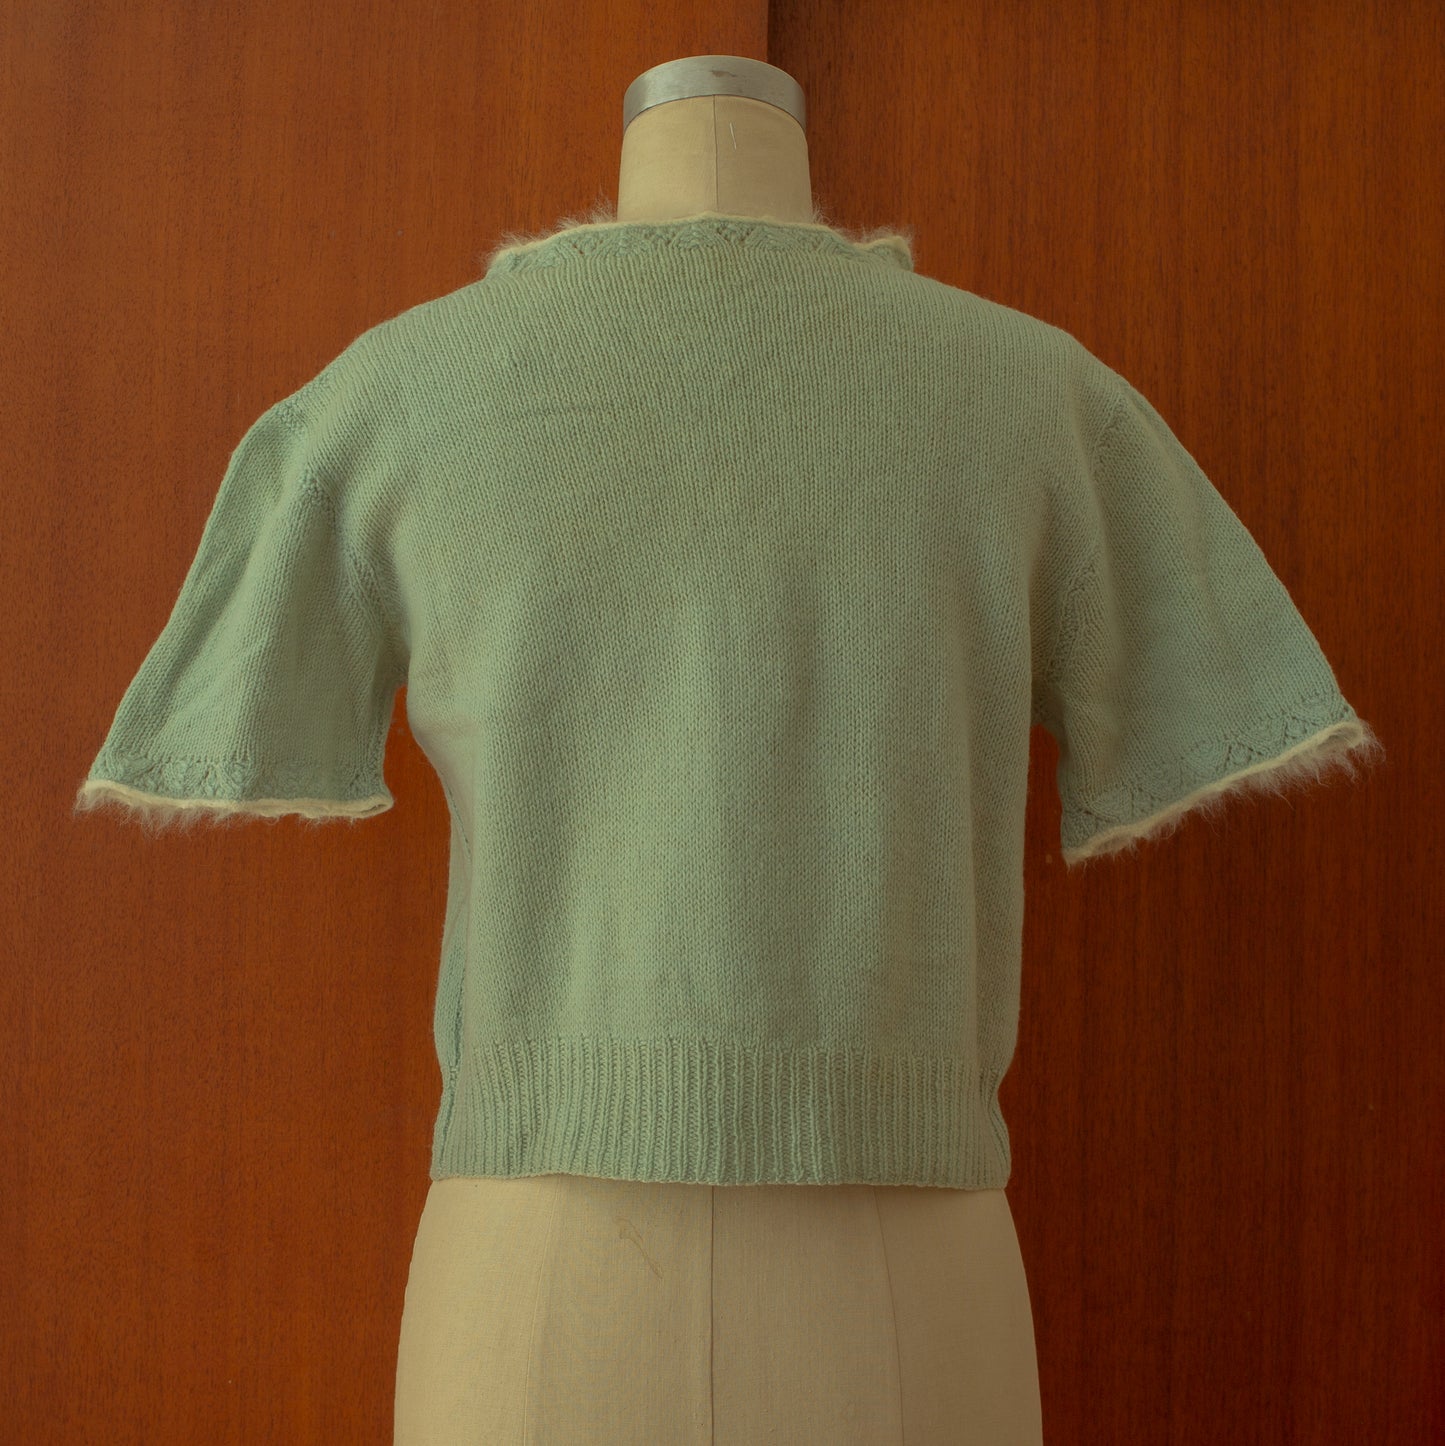 Vintage 1930s 1940s Hand Knit Blue Angora Trimmed Sweater